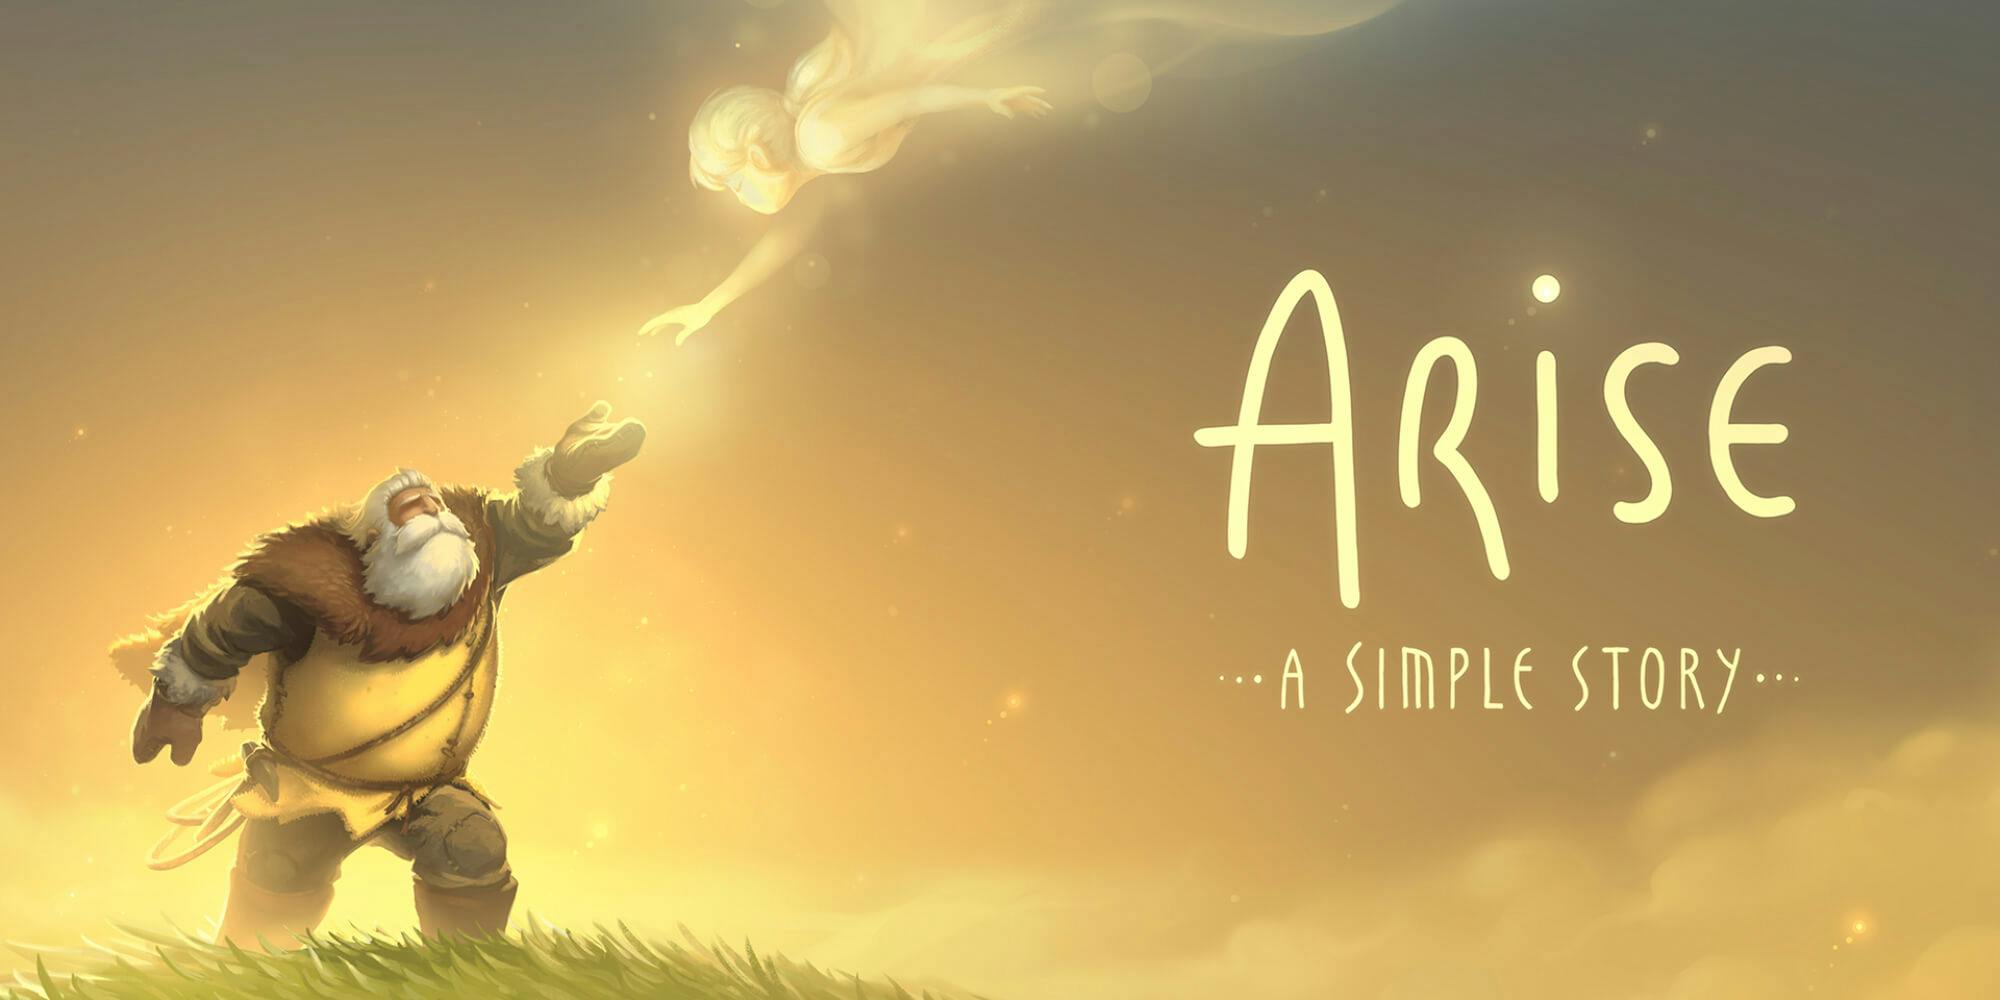 upcoming video games december 2019 arise a simple story release date